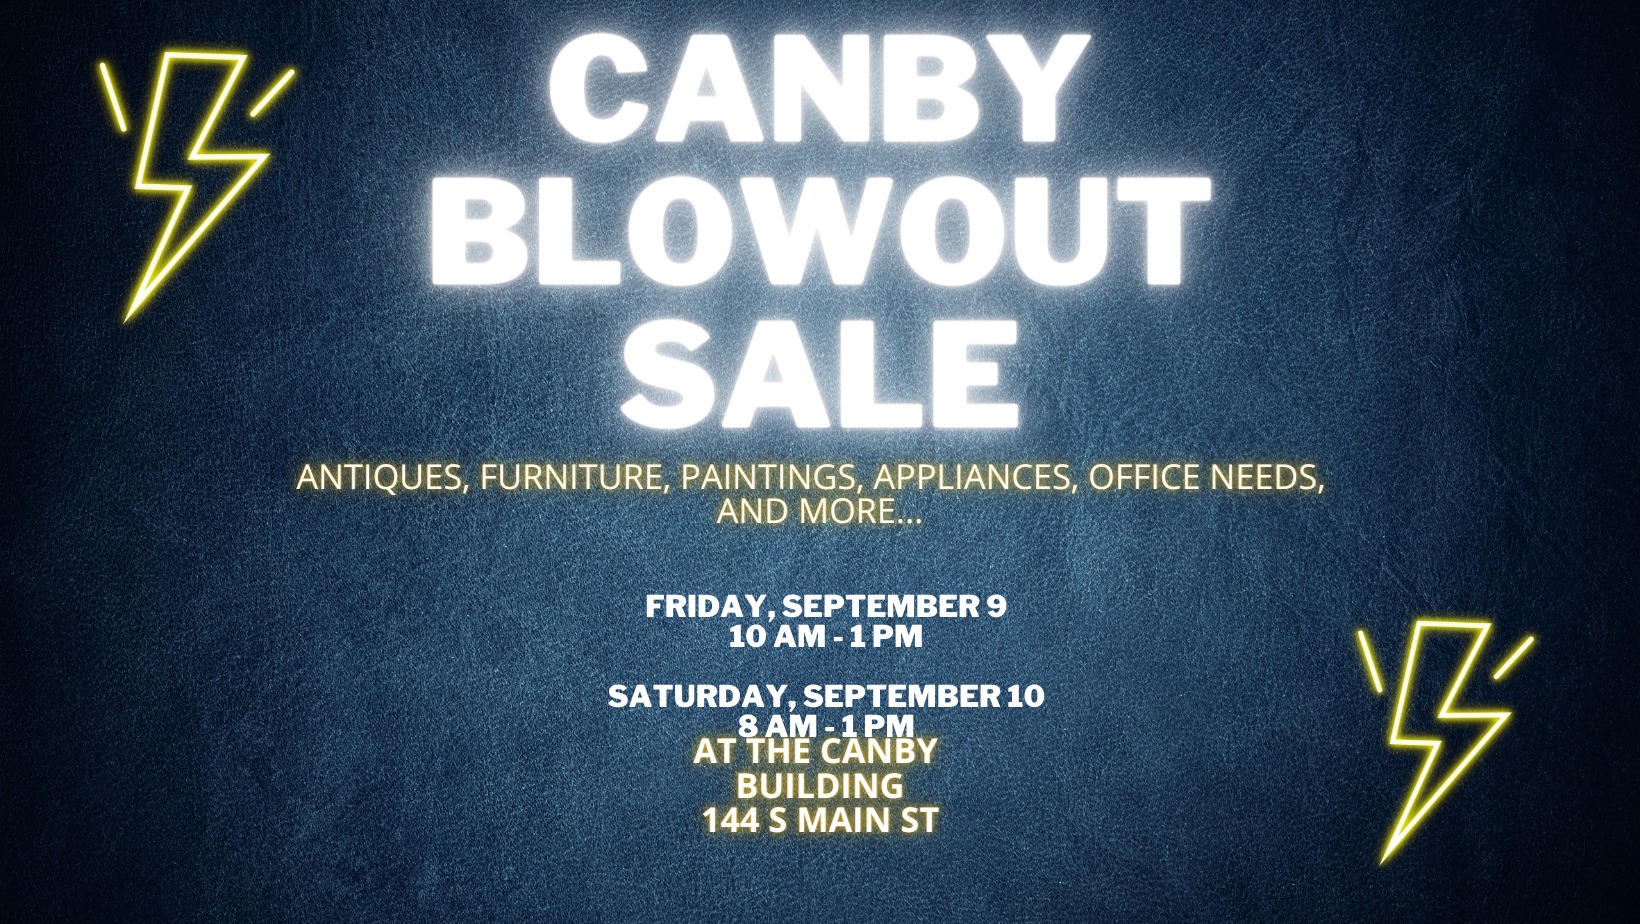 Canby Blowout Sale